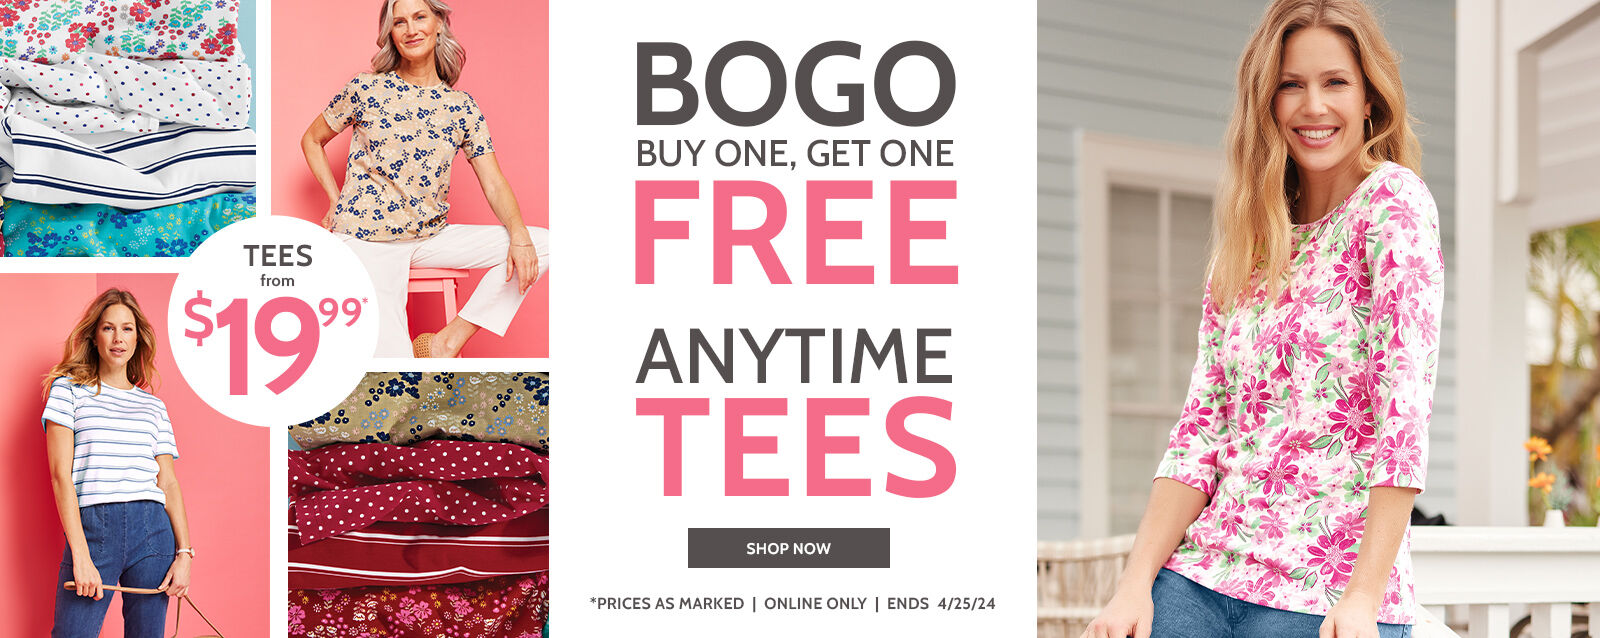 bogo buy one, get one free anytime tees from $19.99* shop now *prices as marked. online only ends 4/25/24